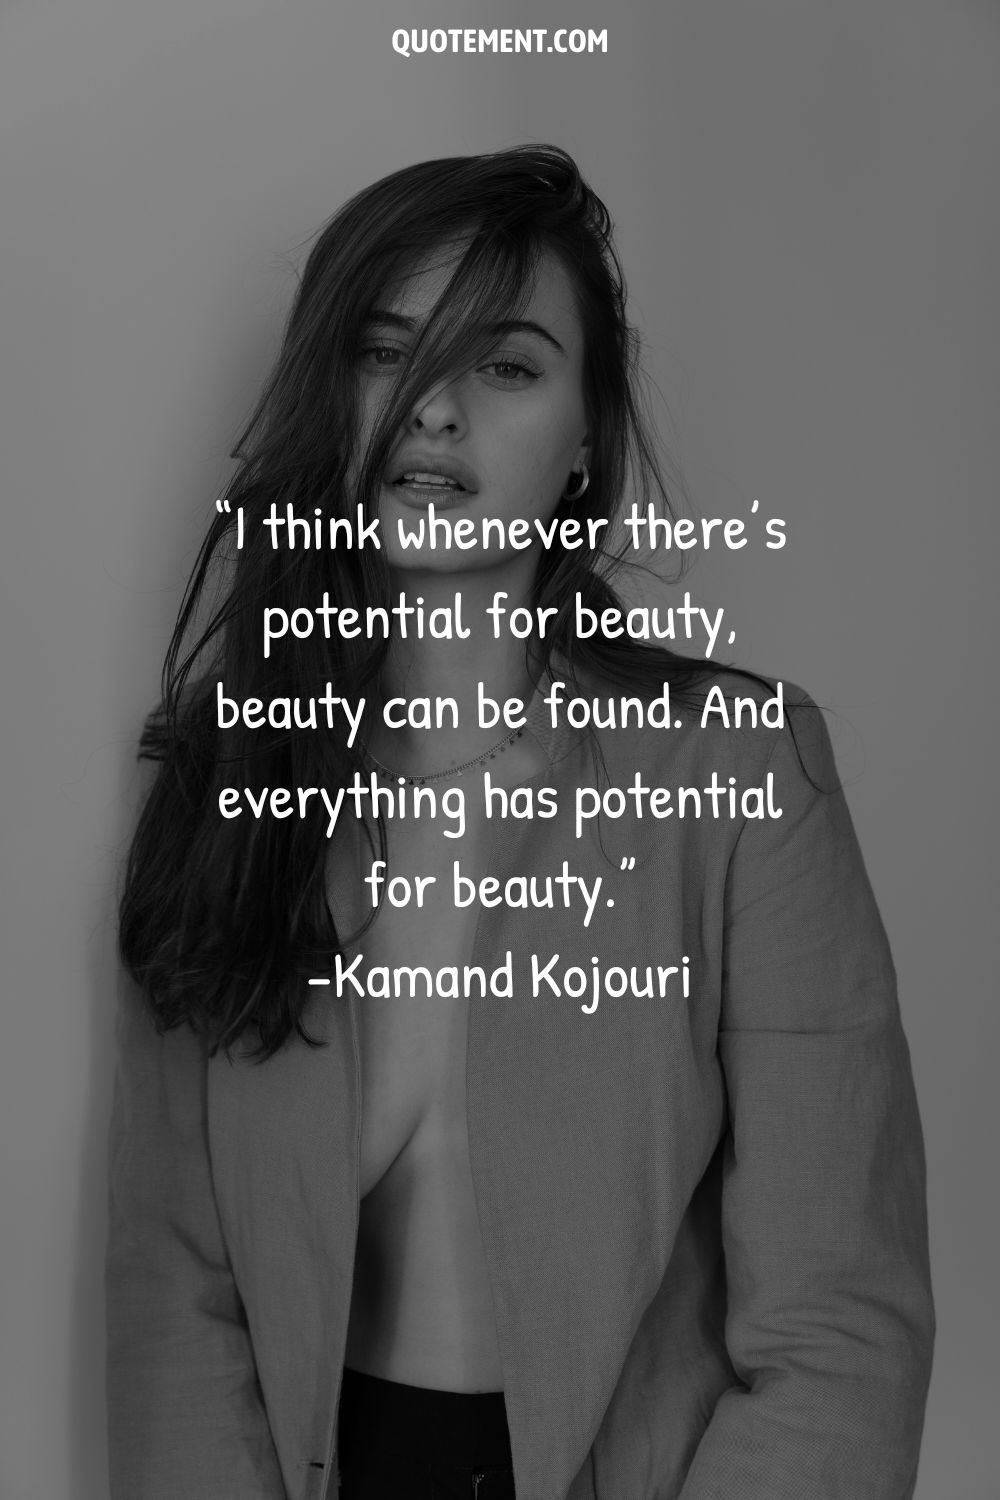 A beautiful girl posing to the camera representing an inspiring you are beautiful quote